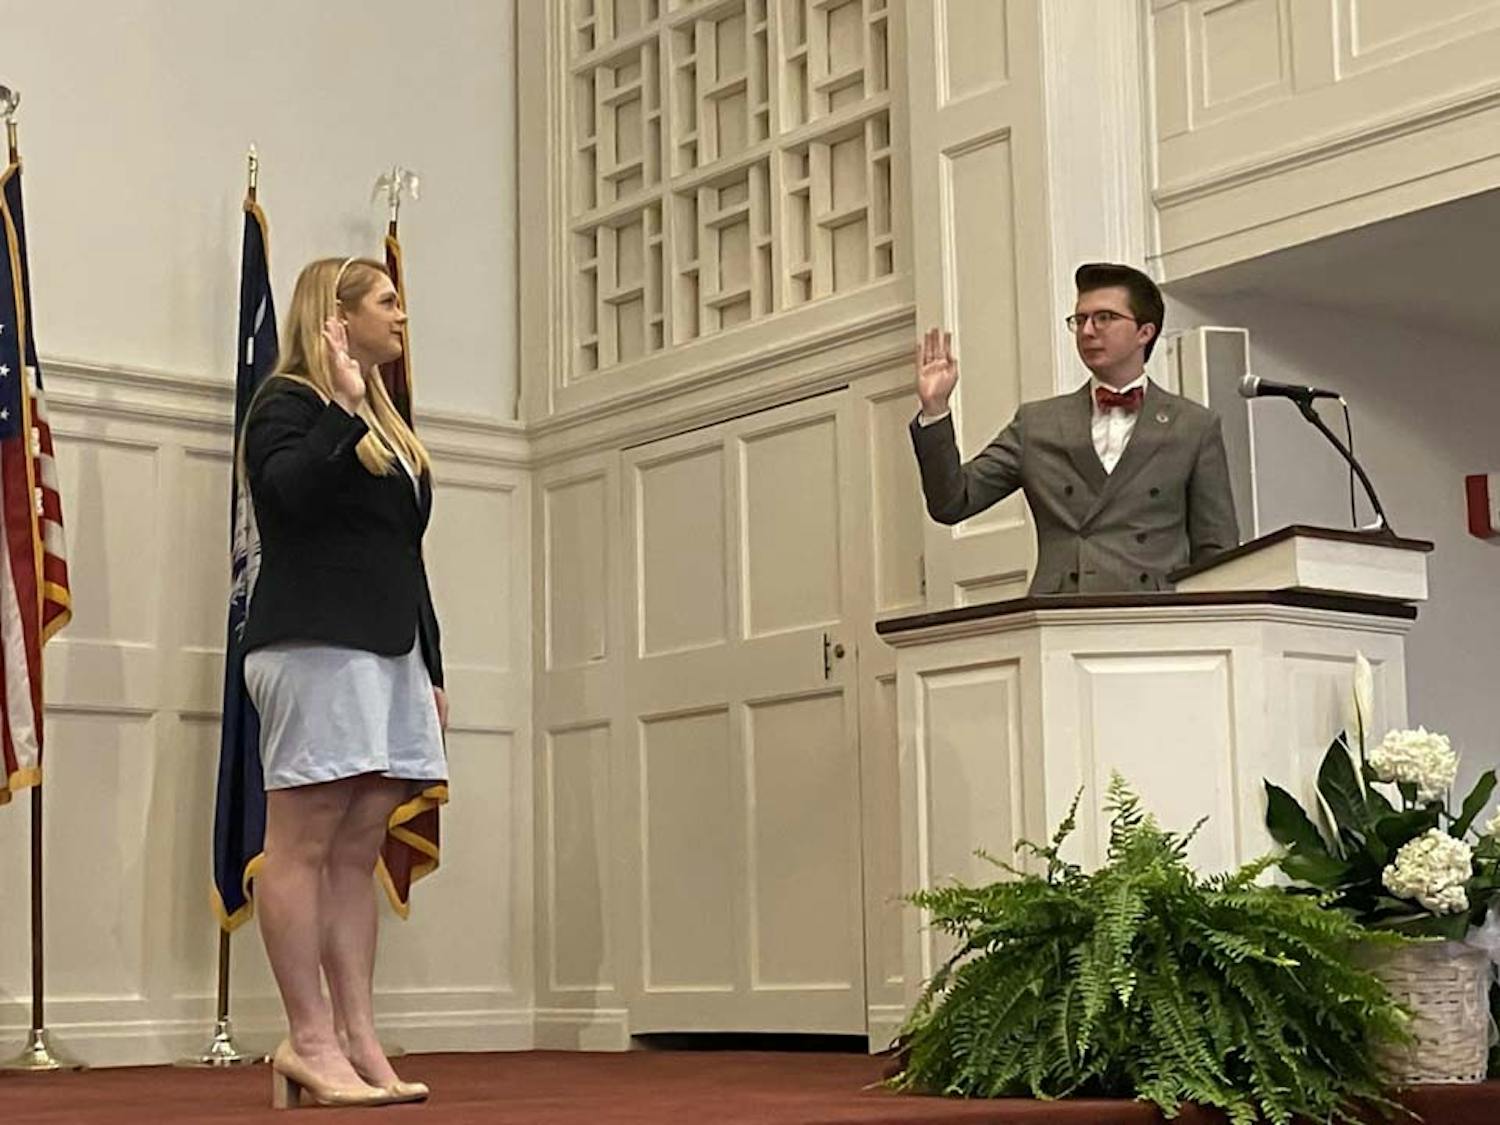 Student body president-elect Reedy Newton inaugurated by constitutional council chief justice Robert Cathcart on March 24, 2022.